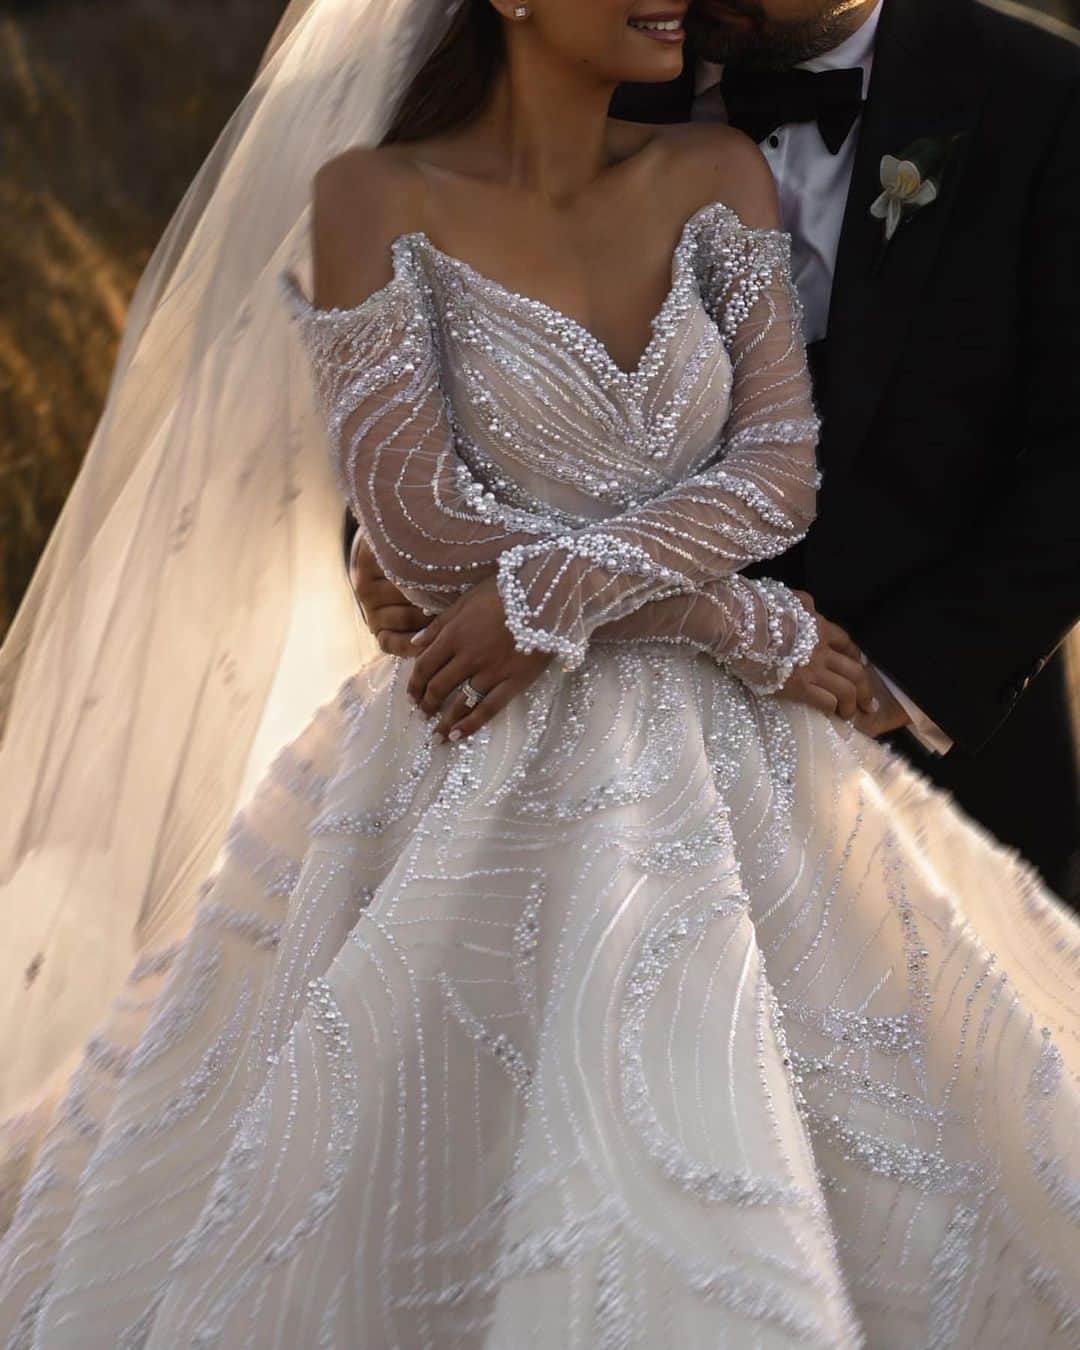 Steven Khalilのインスタグラム：「A mesmerising display of intricate hand beading, our extraordinary bride Juliana looked absolutely breathtaking in her bespoke STEVEN KHALIL couture gown. Captured by @emiliobphotography ⠀⠀⠀⠀⠀⠀⠀⠀⠀ #stevenkhalil #stevenkhalilbride #weddinggown #bridal」